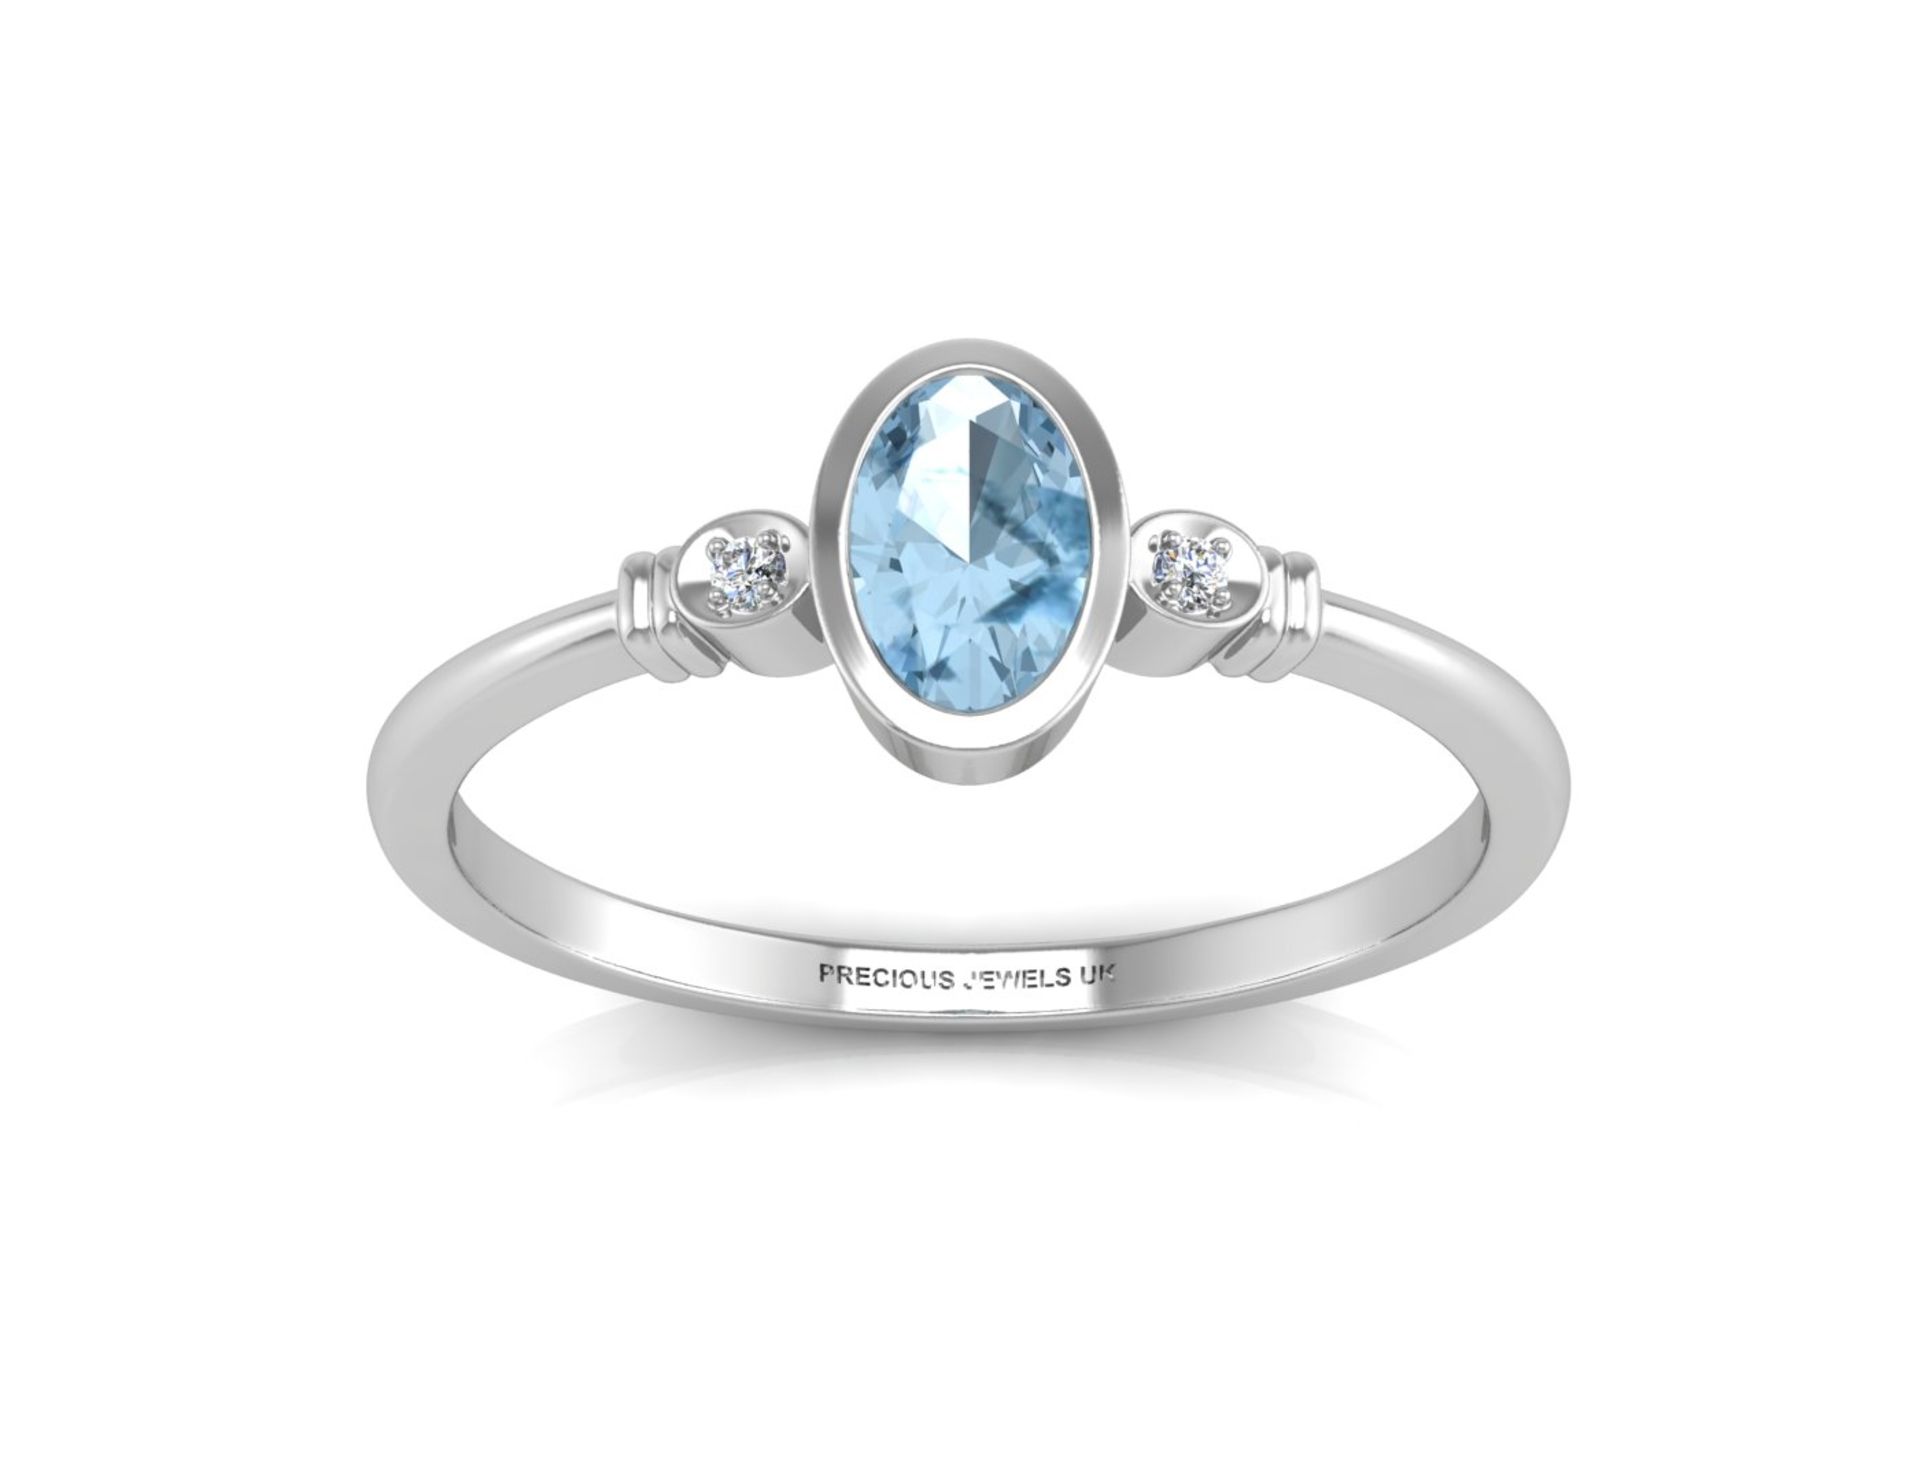 9ct White Gold Diamond And Oval Shape Blue Topaz Ring - Valued By IDI £1,225.00 - This stunning ring - Image 3 of 5